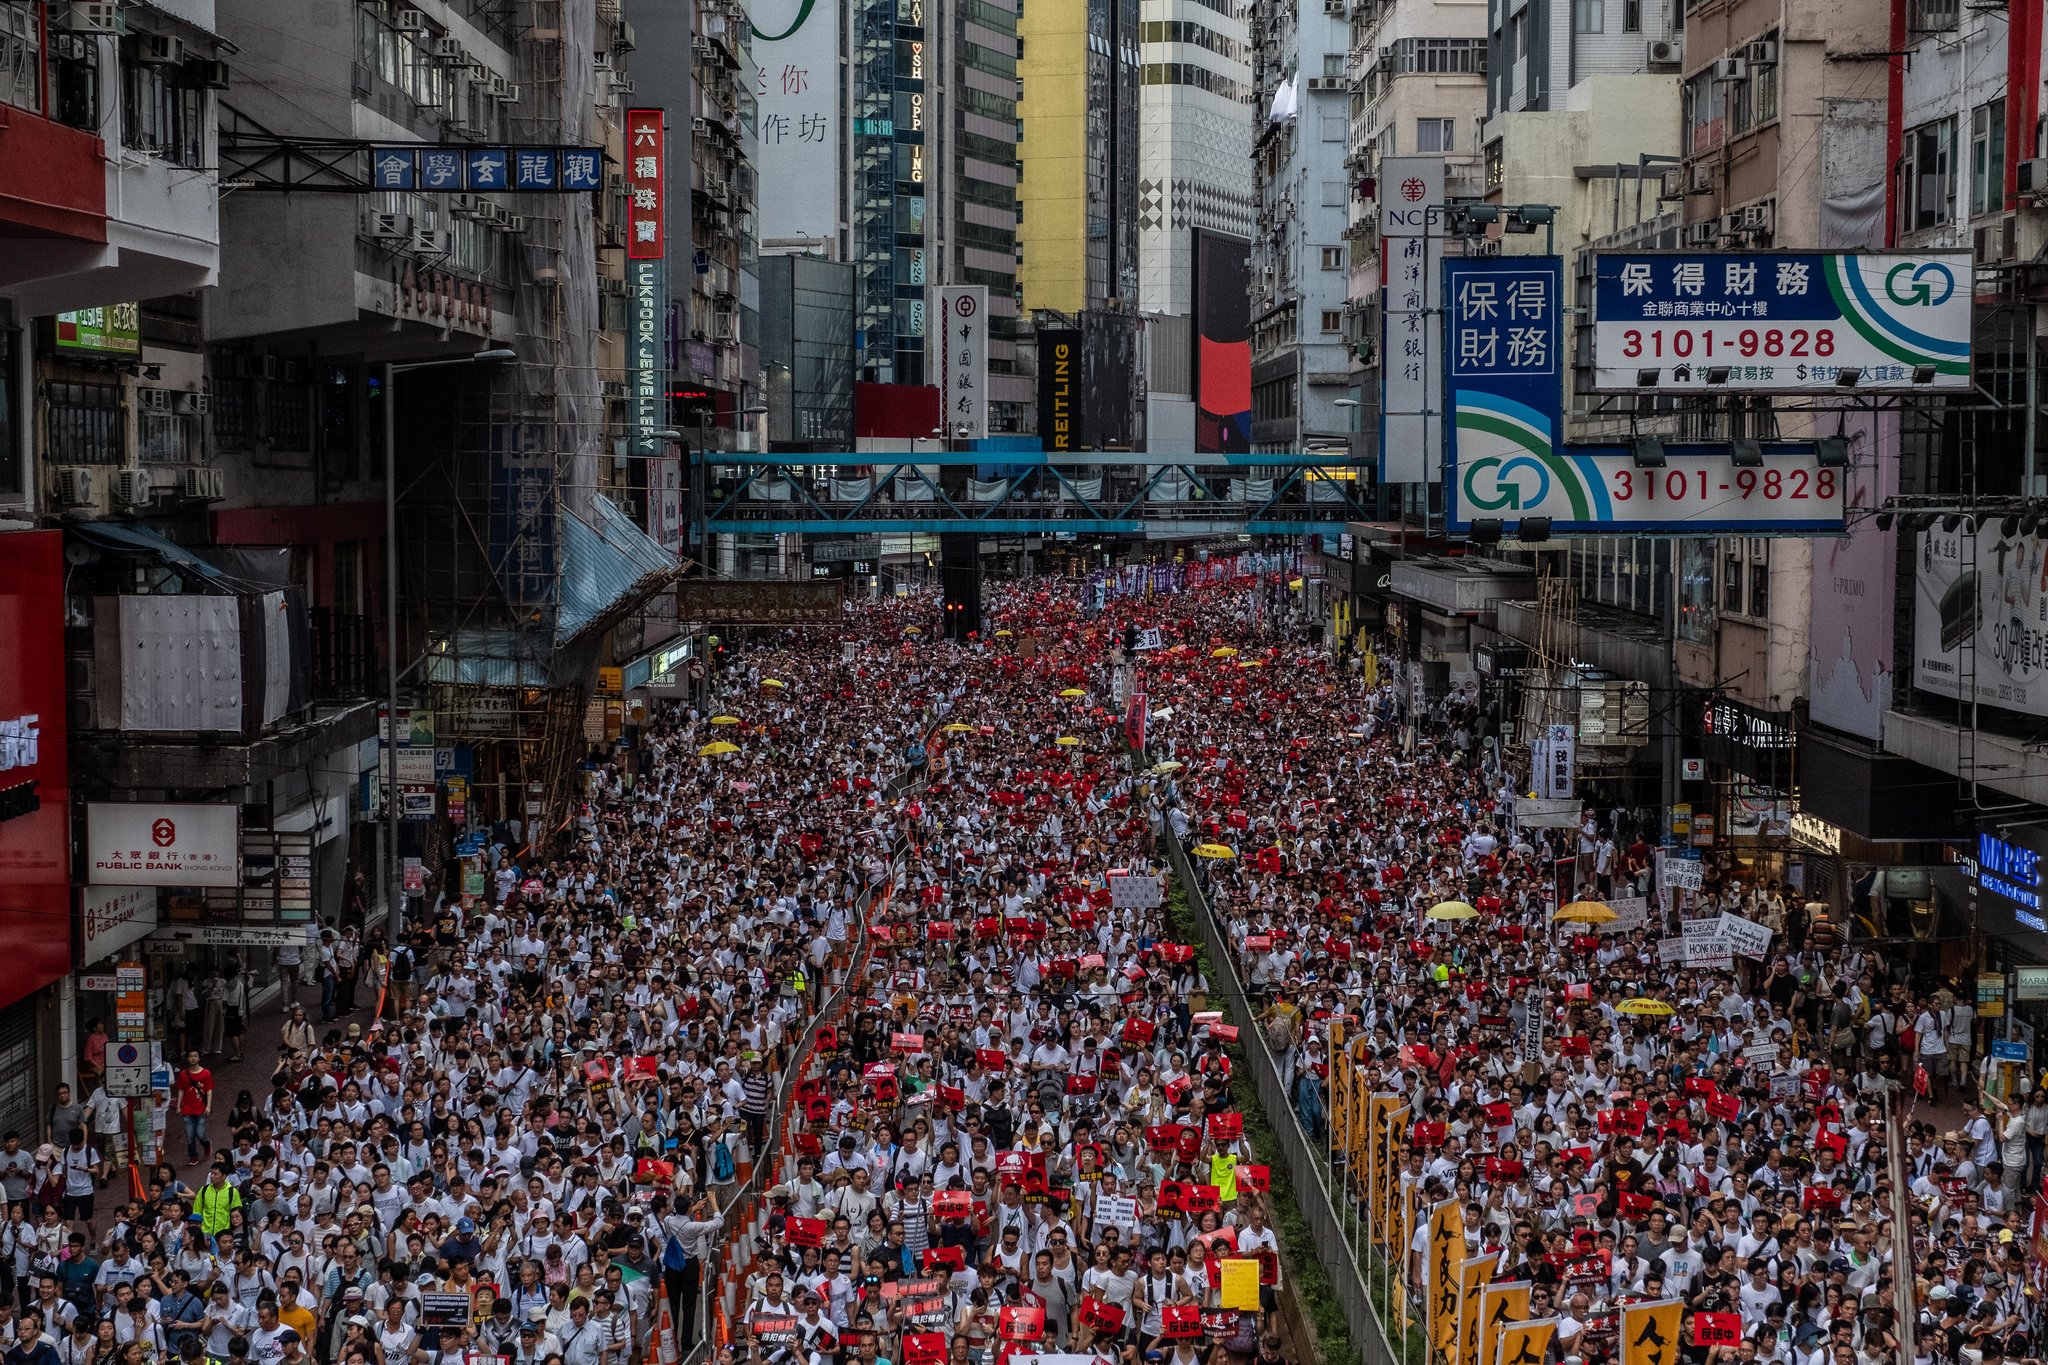 Crowded street in hong kong